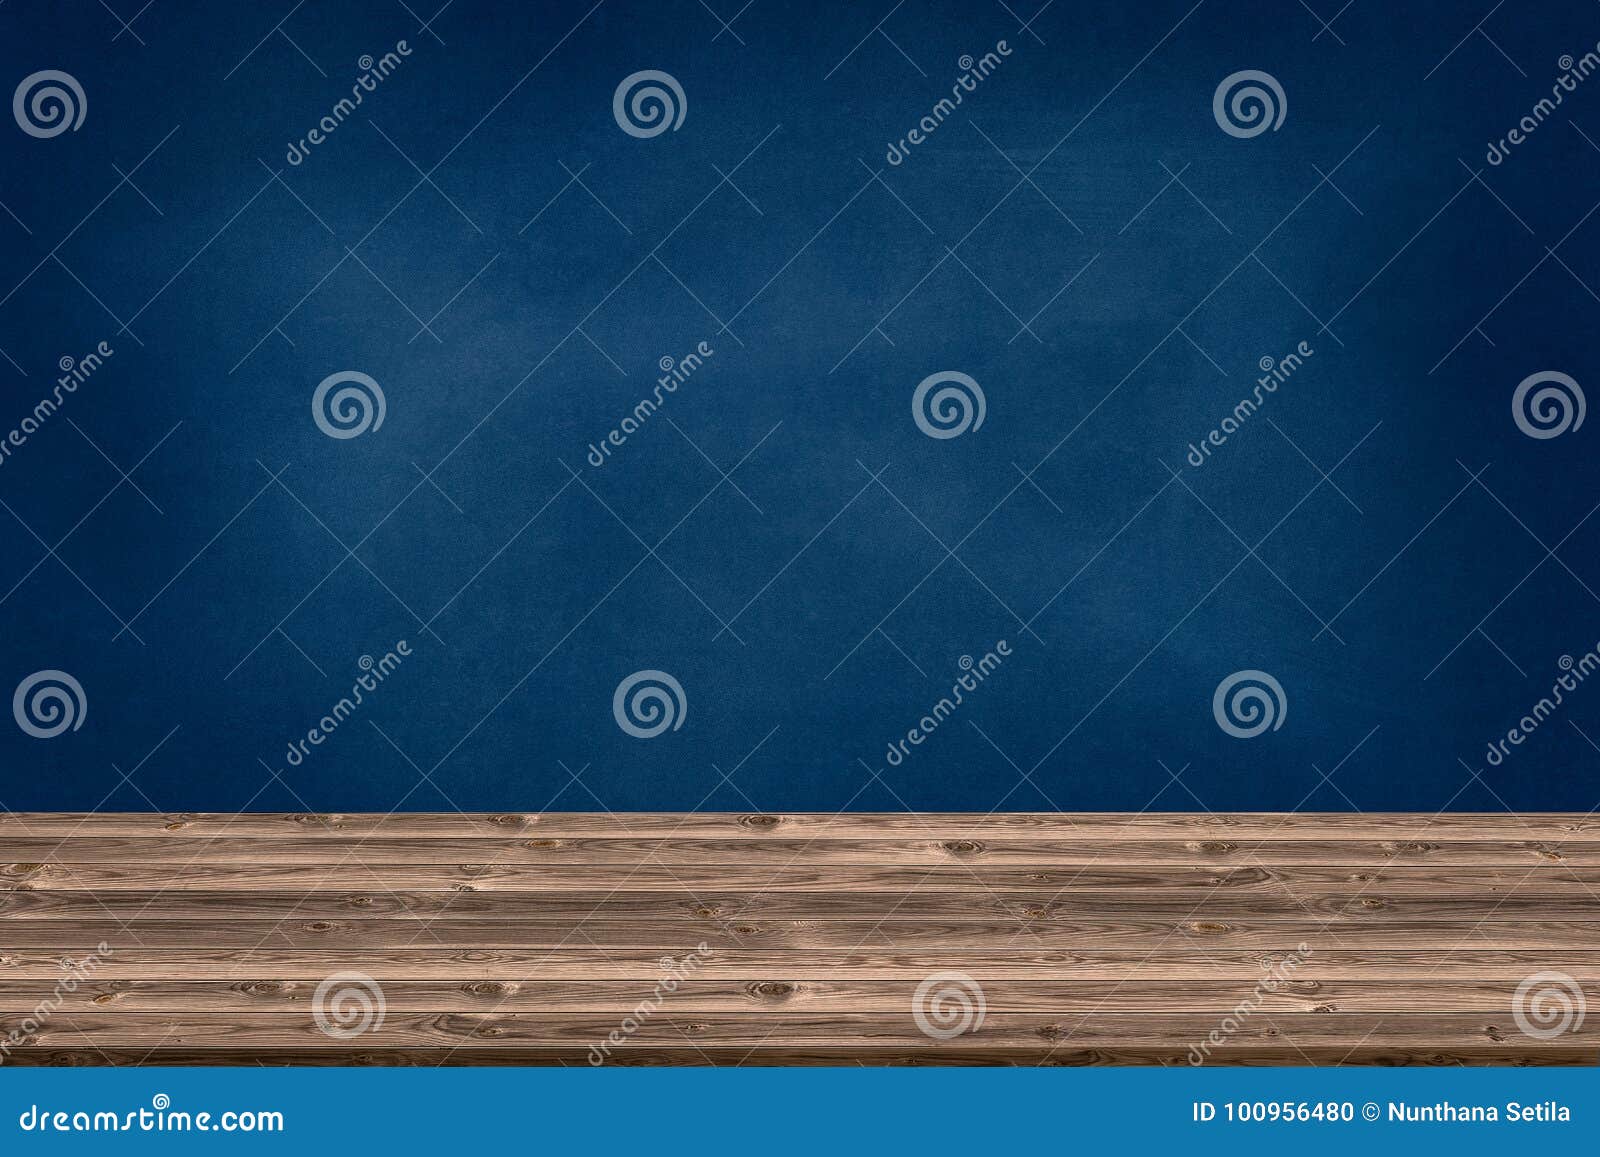 abstract wooden table texture and chalk rubbed out on blackboard, for graphic add product, education concept,